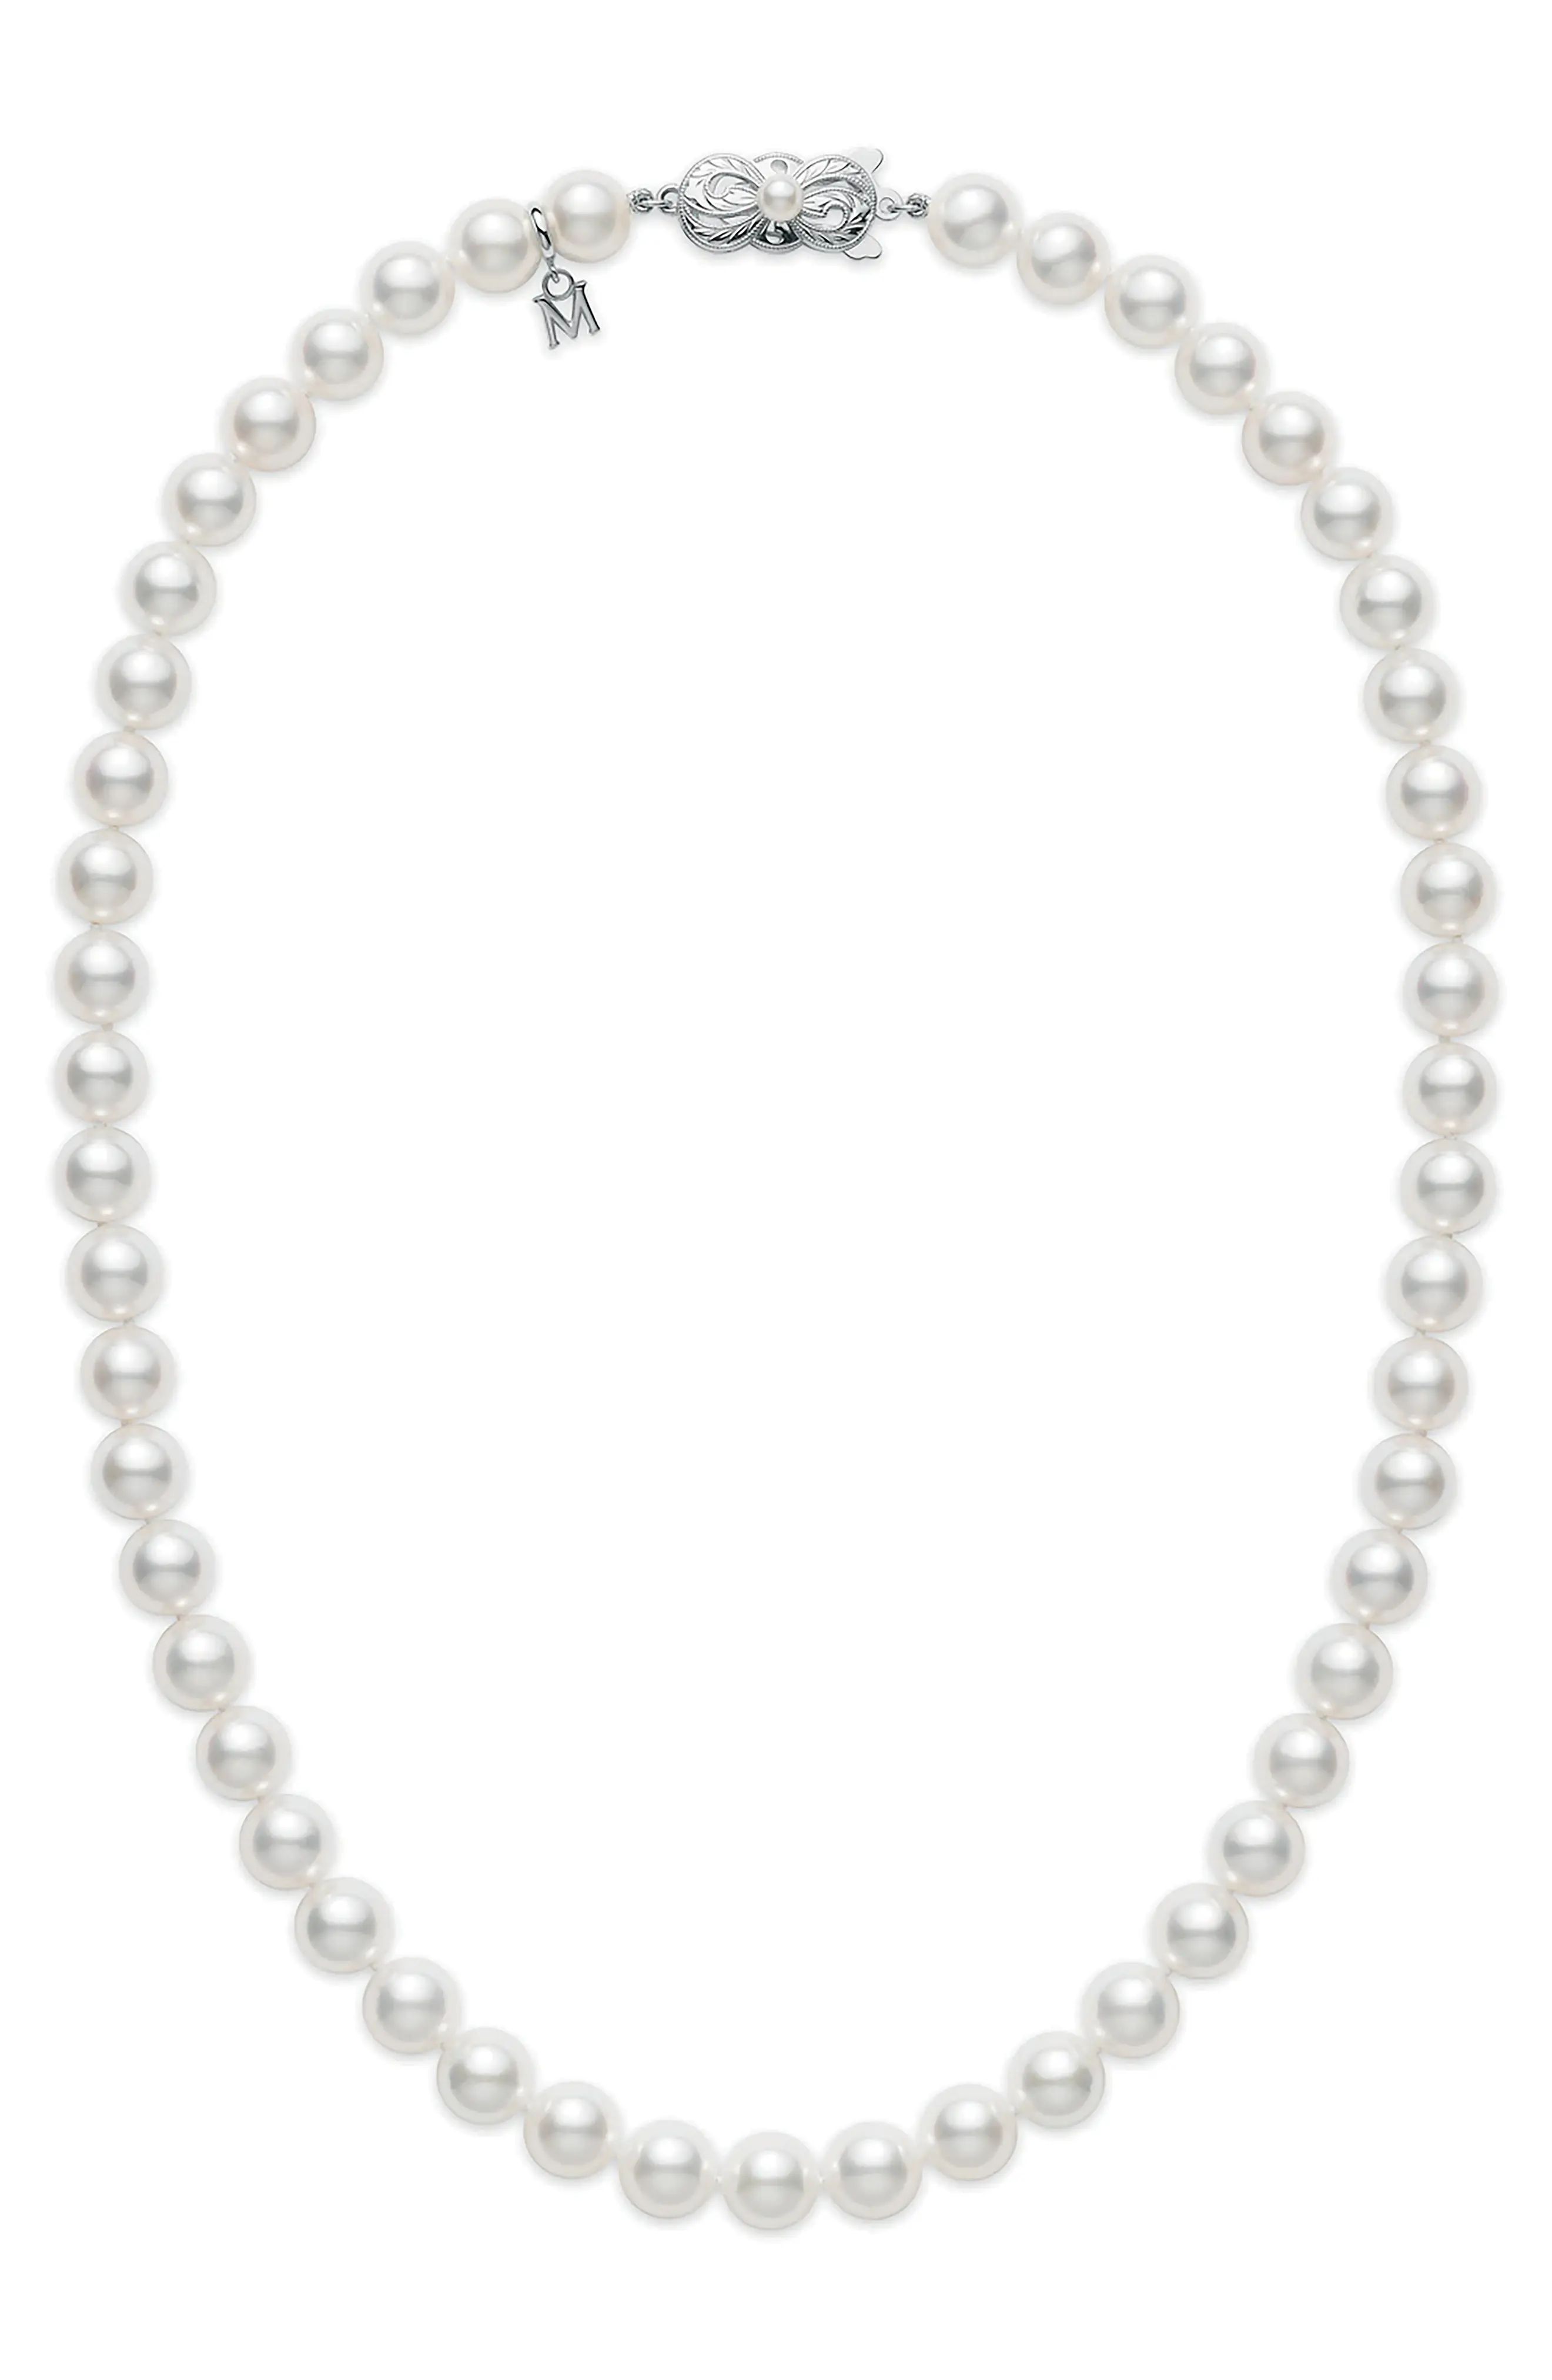 Mikimoto Essential Elements Akoya Cultured Pearl Necklace at Nordstrom, Size 18 | Nordstrom